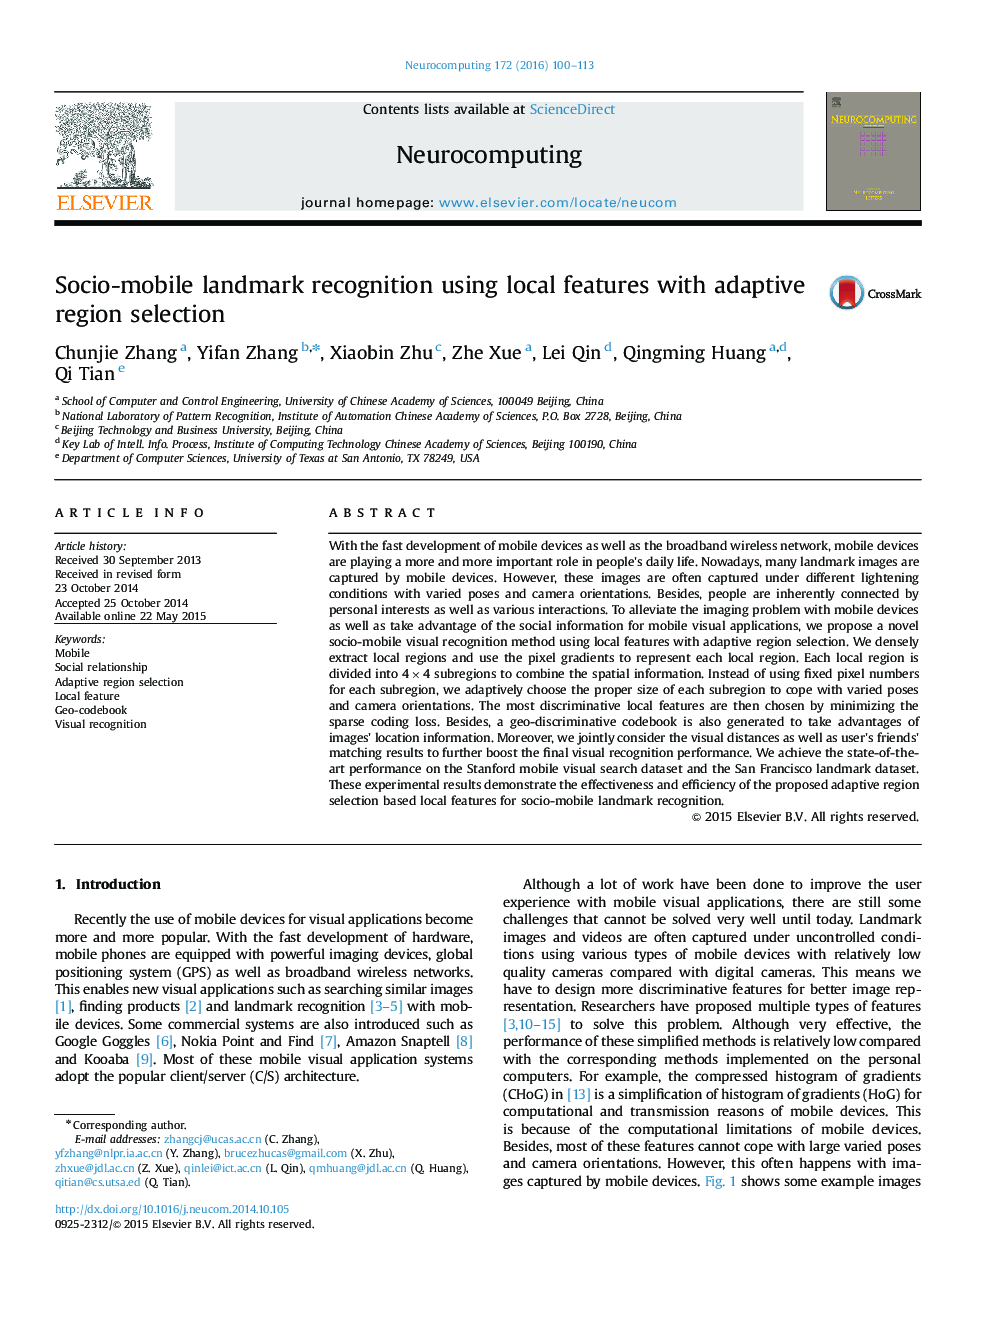 Socio-mobile landmark recognition using local features with adaptive region selection